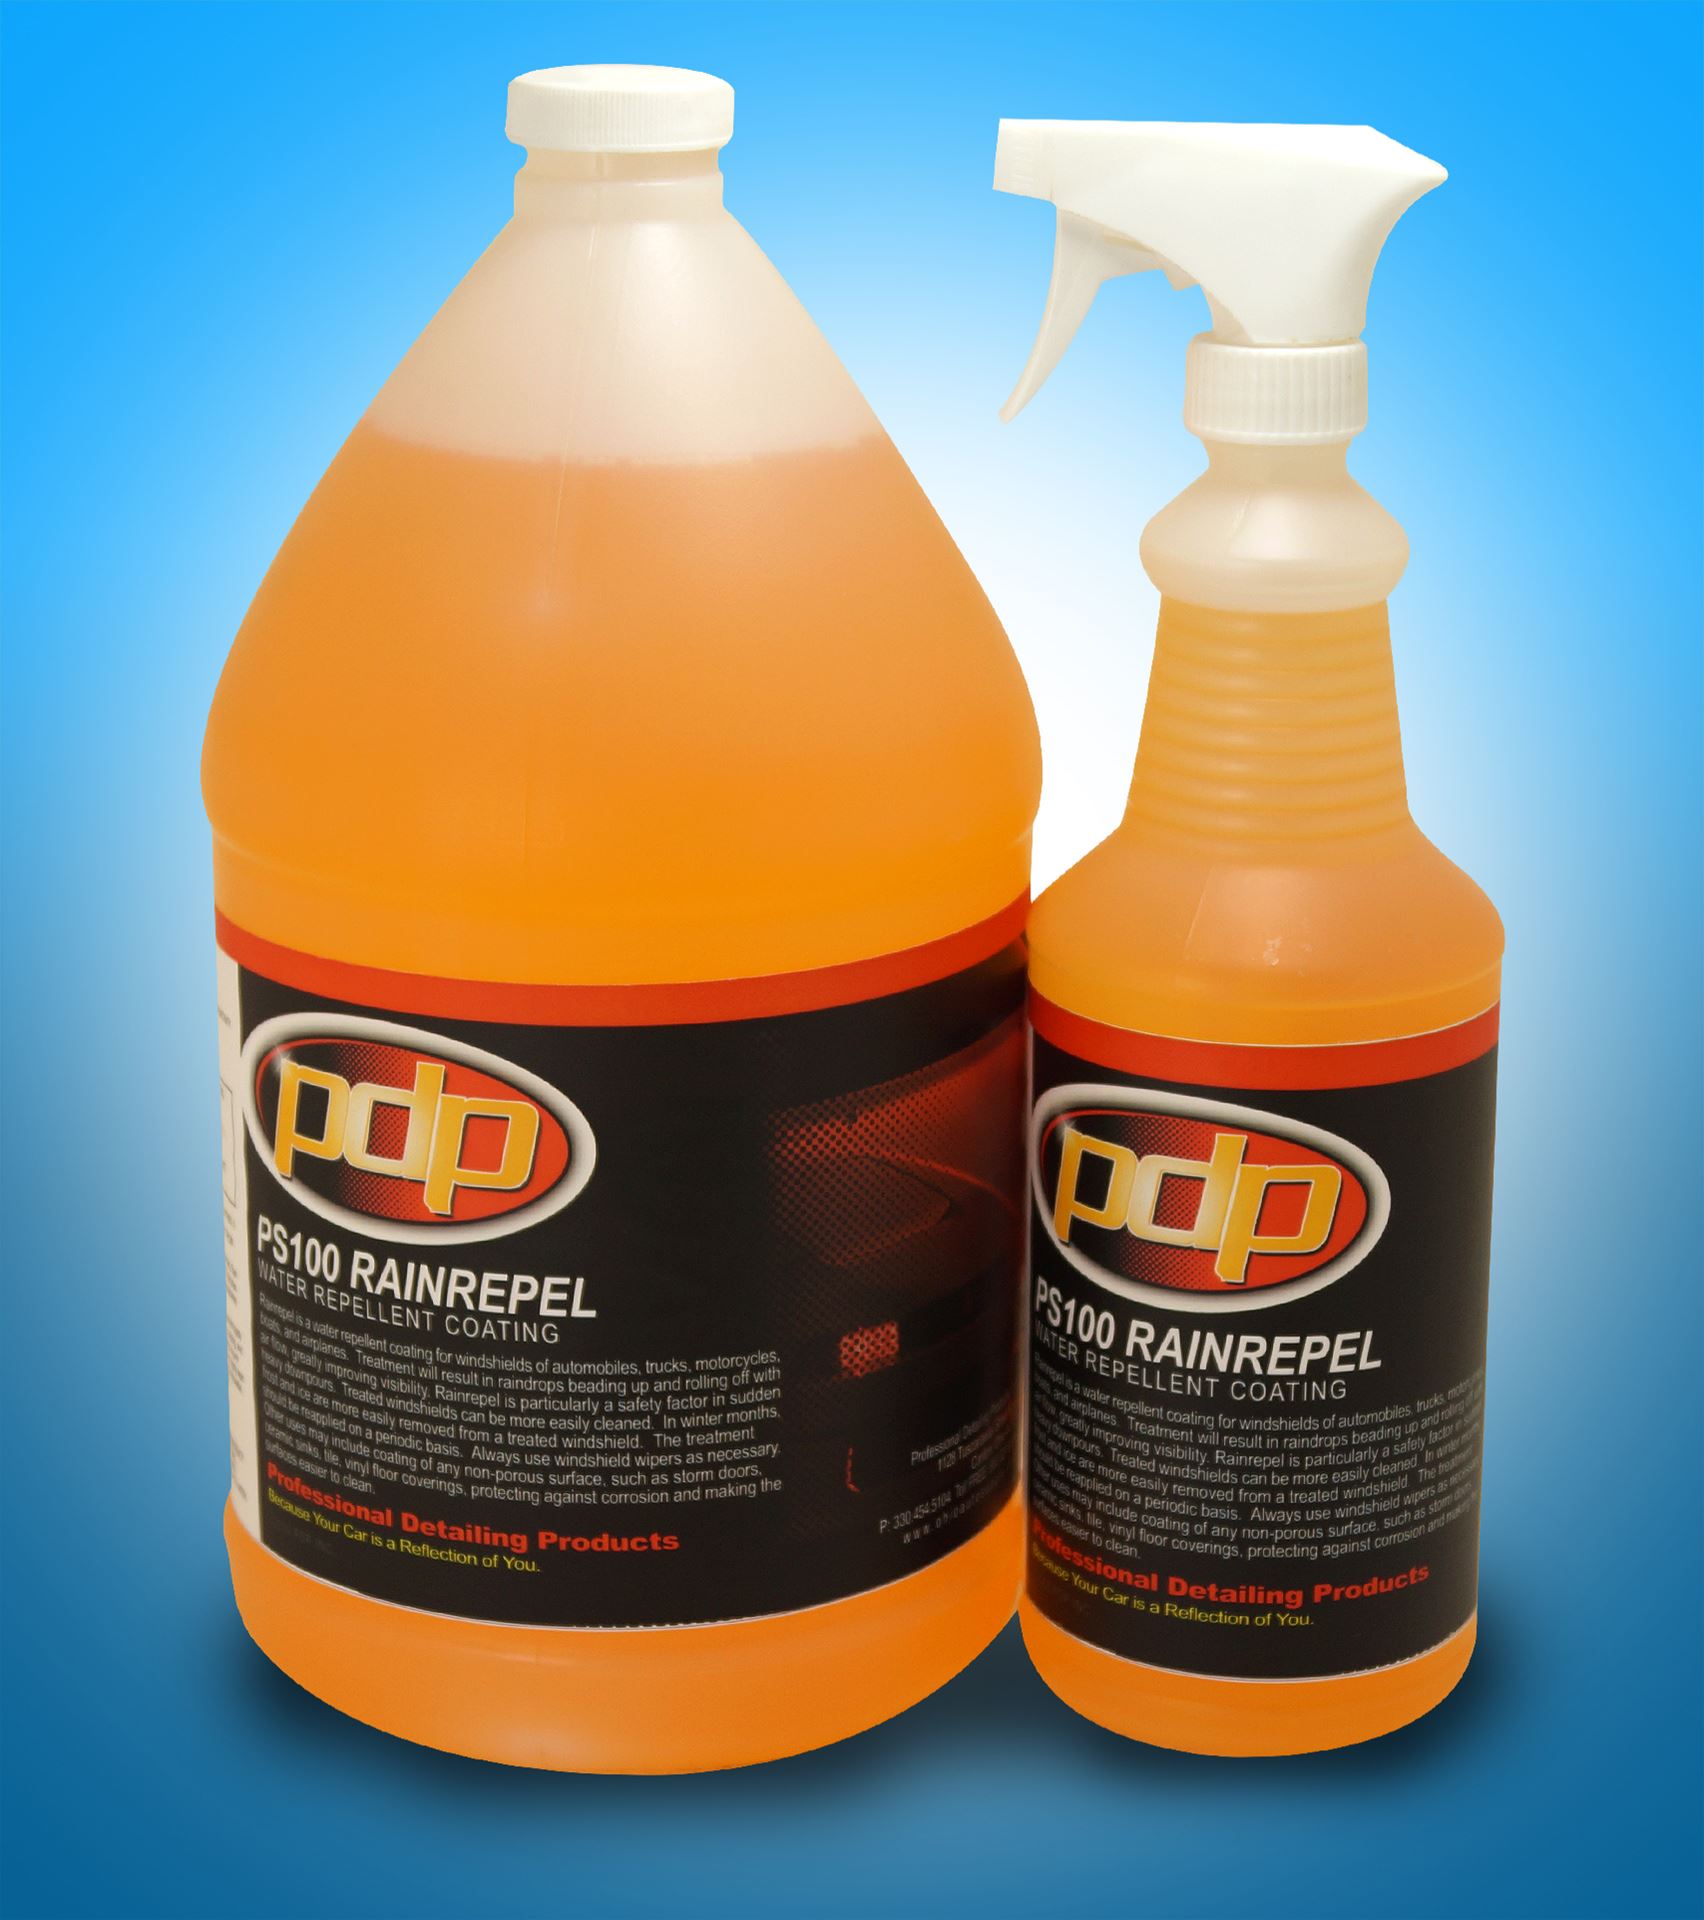 Rain repellent - how effective is this? - Page 5 - Team-BHP